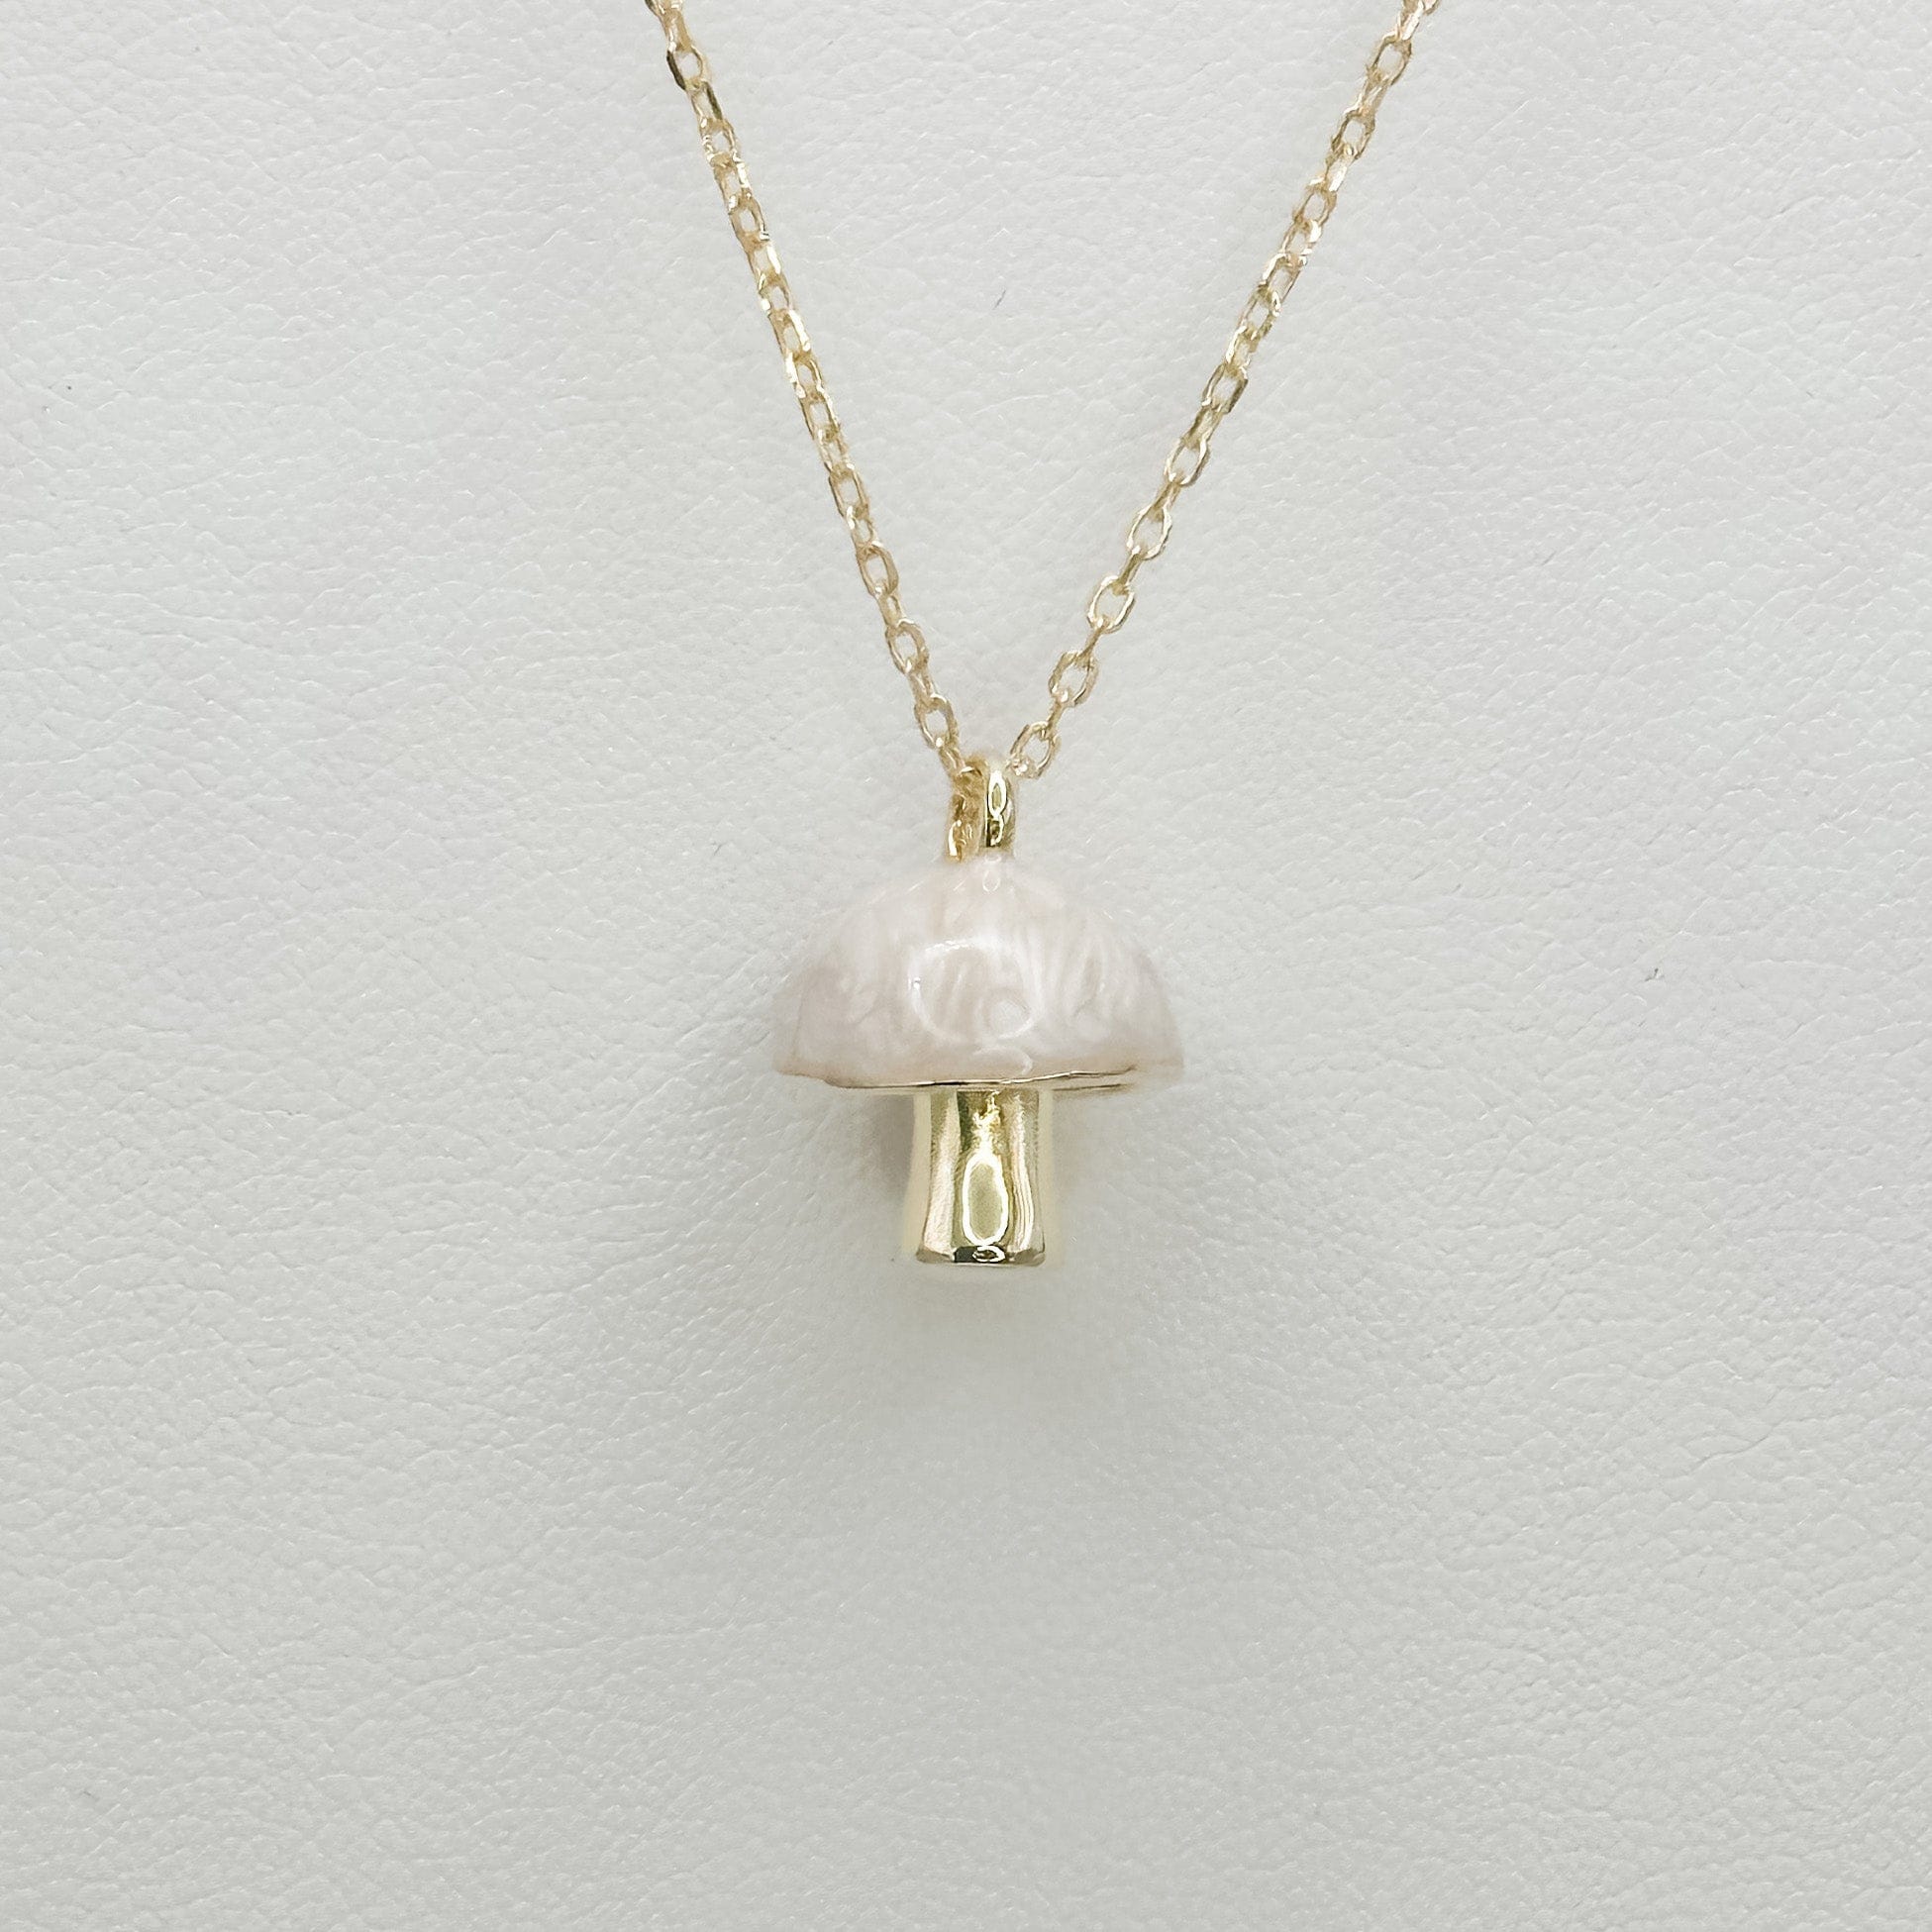 Large Knot Chain | White opal, Discount jewelry, Large white